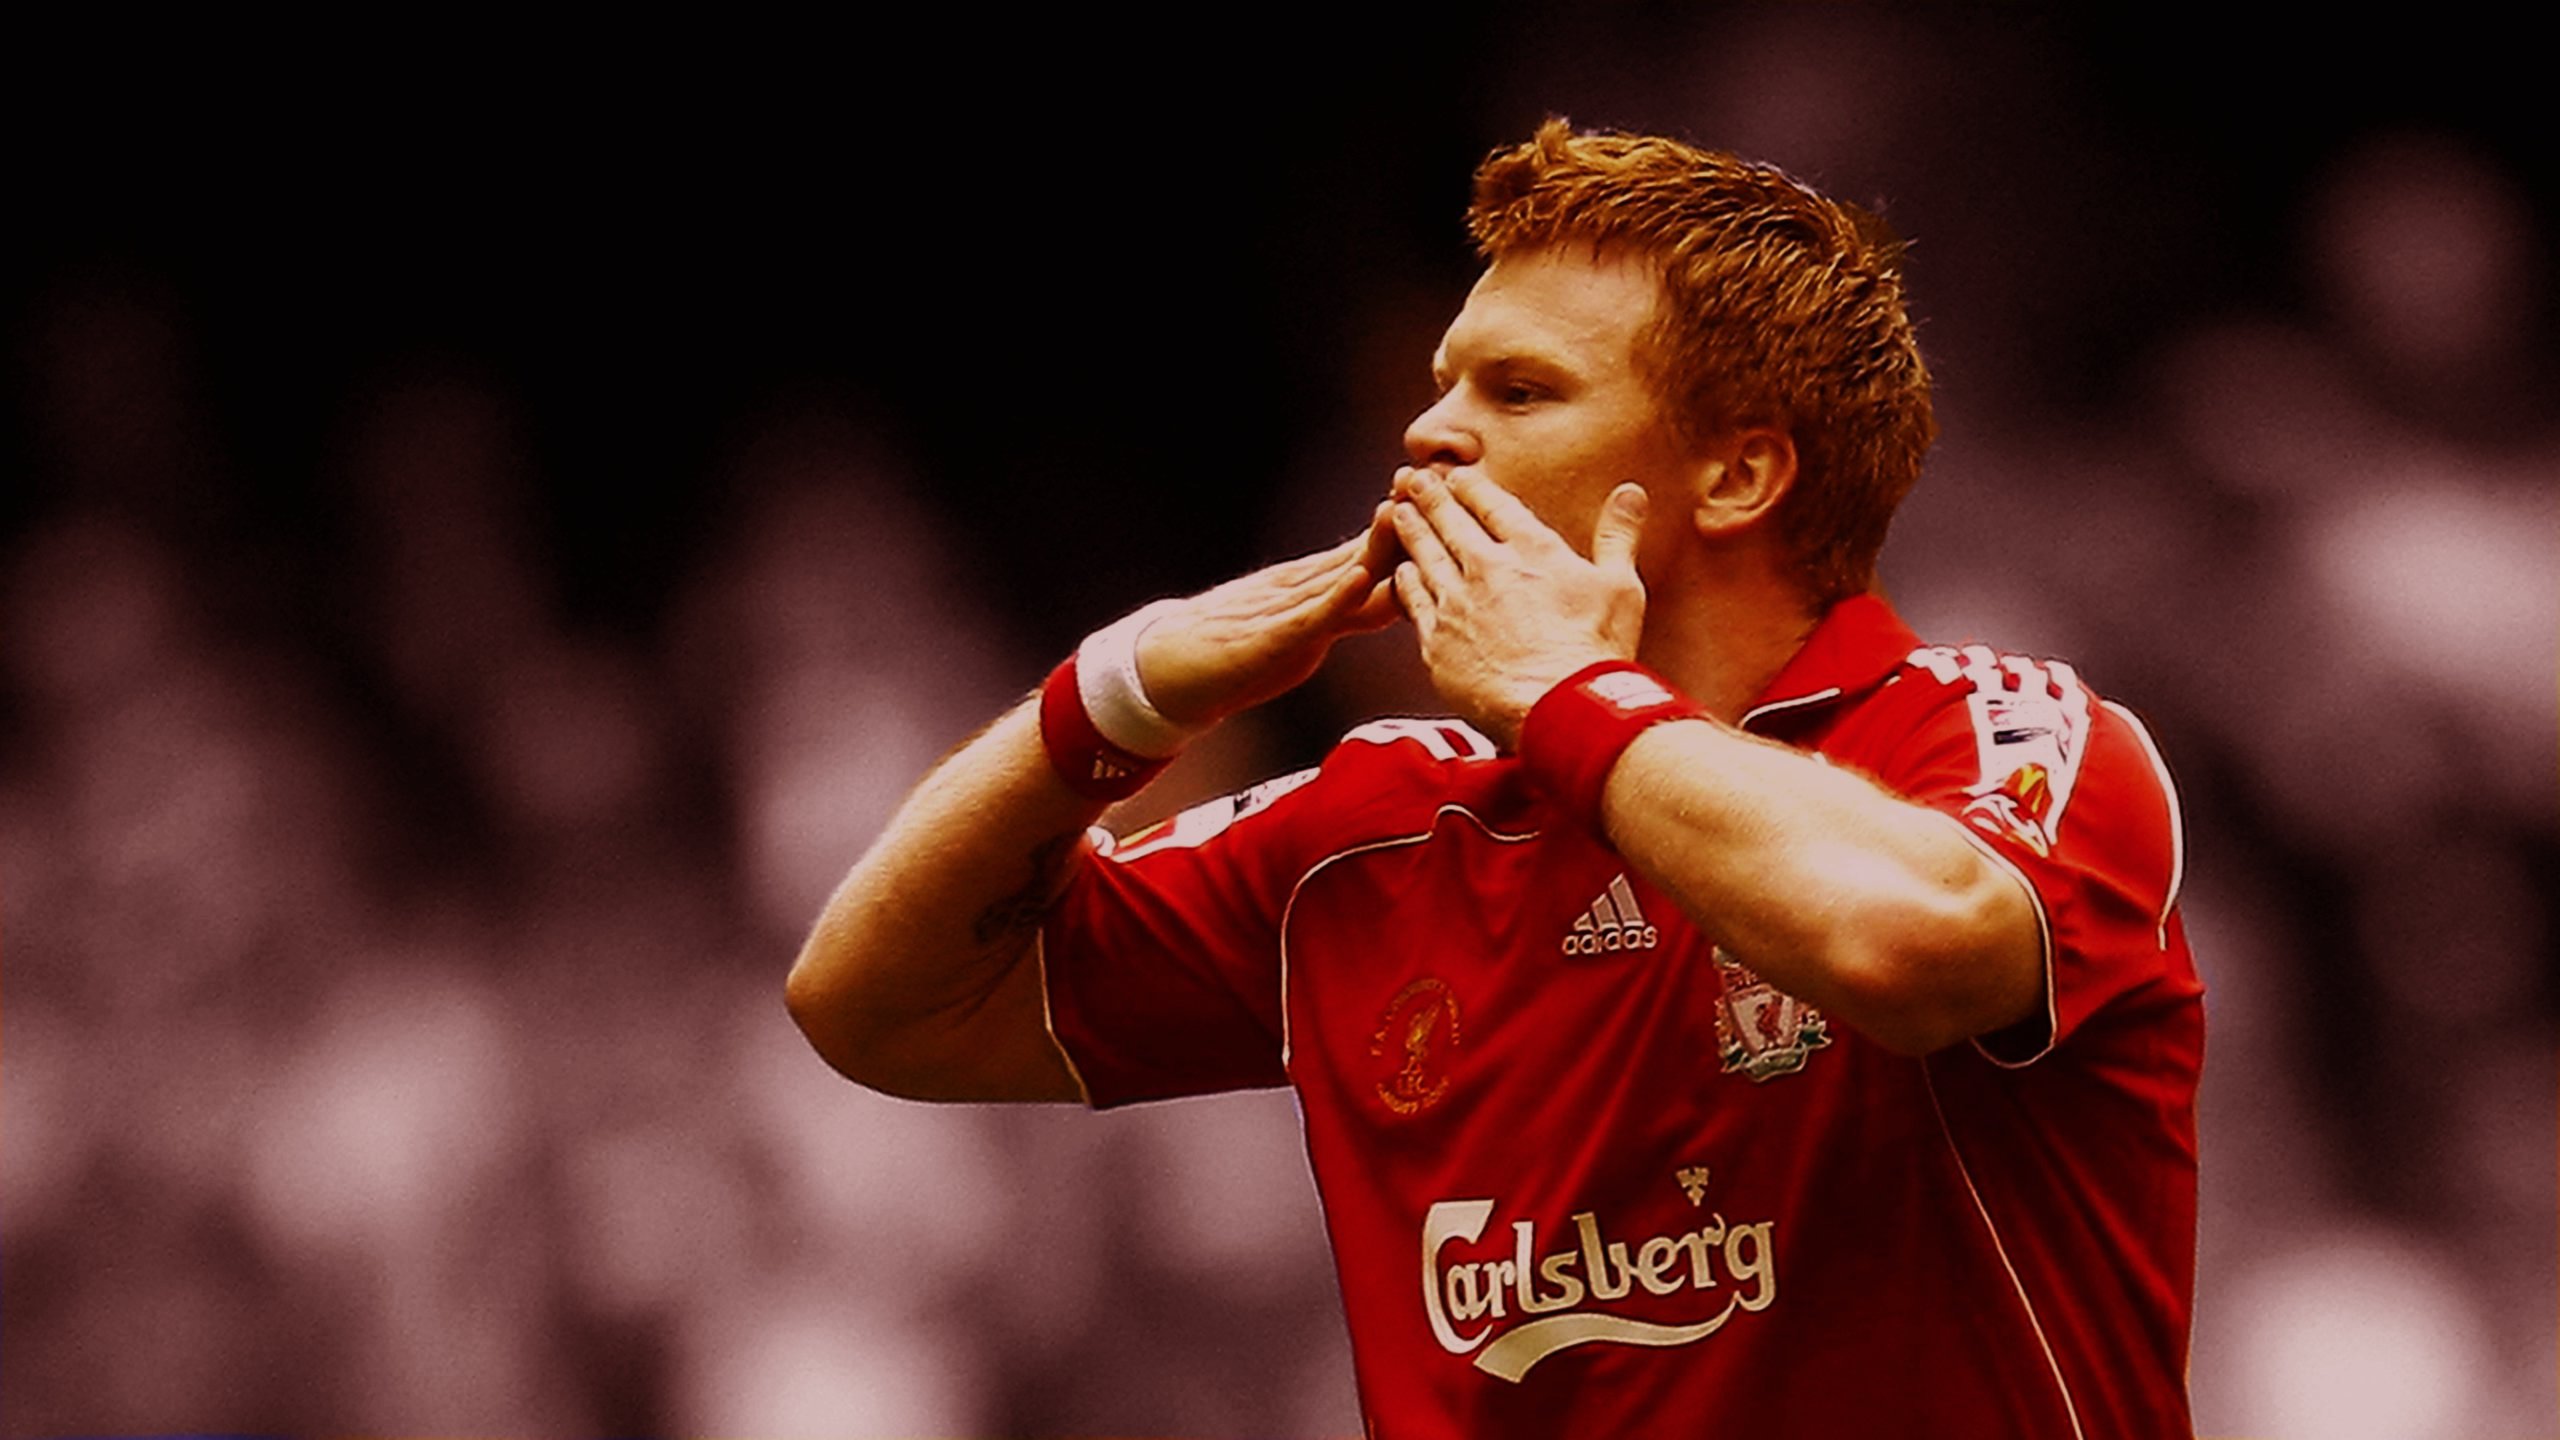 COMPETITION: Meet John Arne Riise in London on Friday – Anfield Road